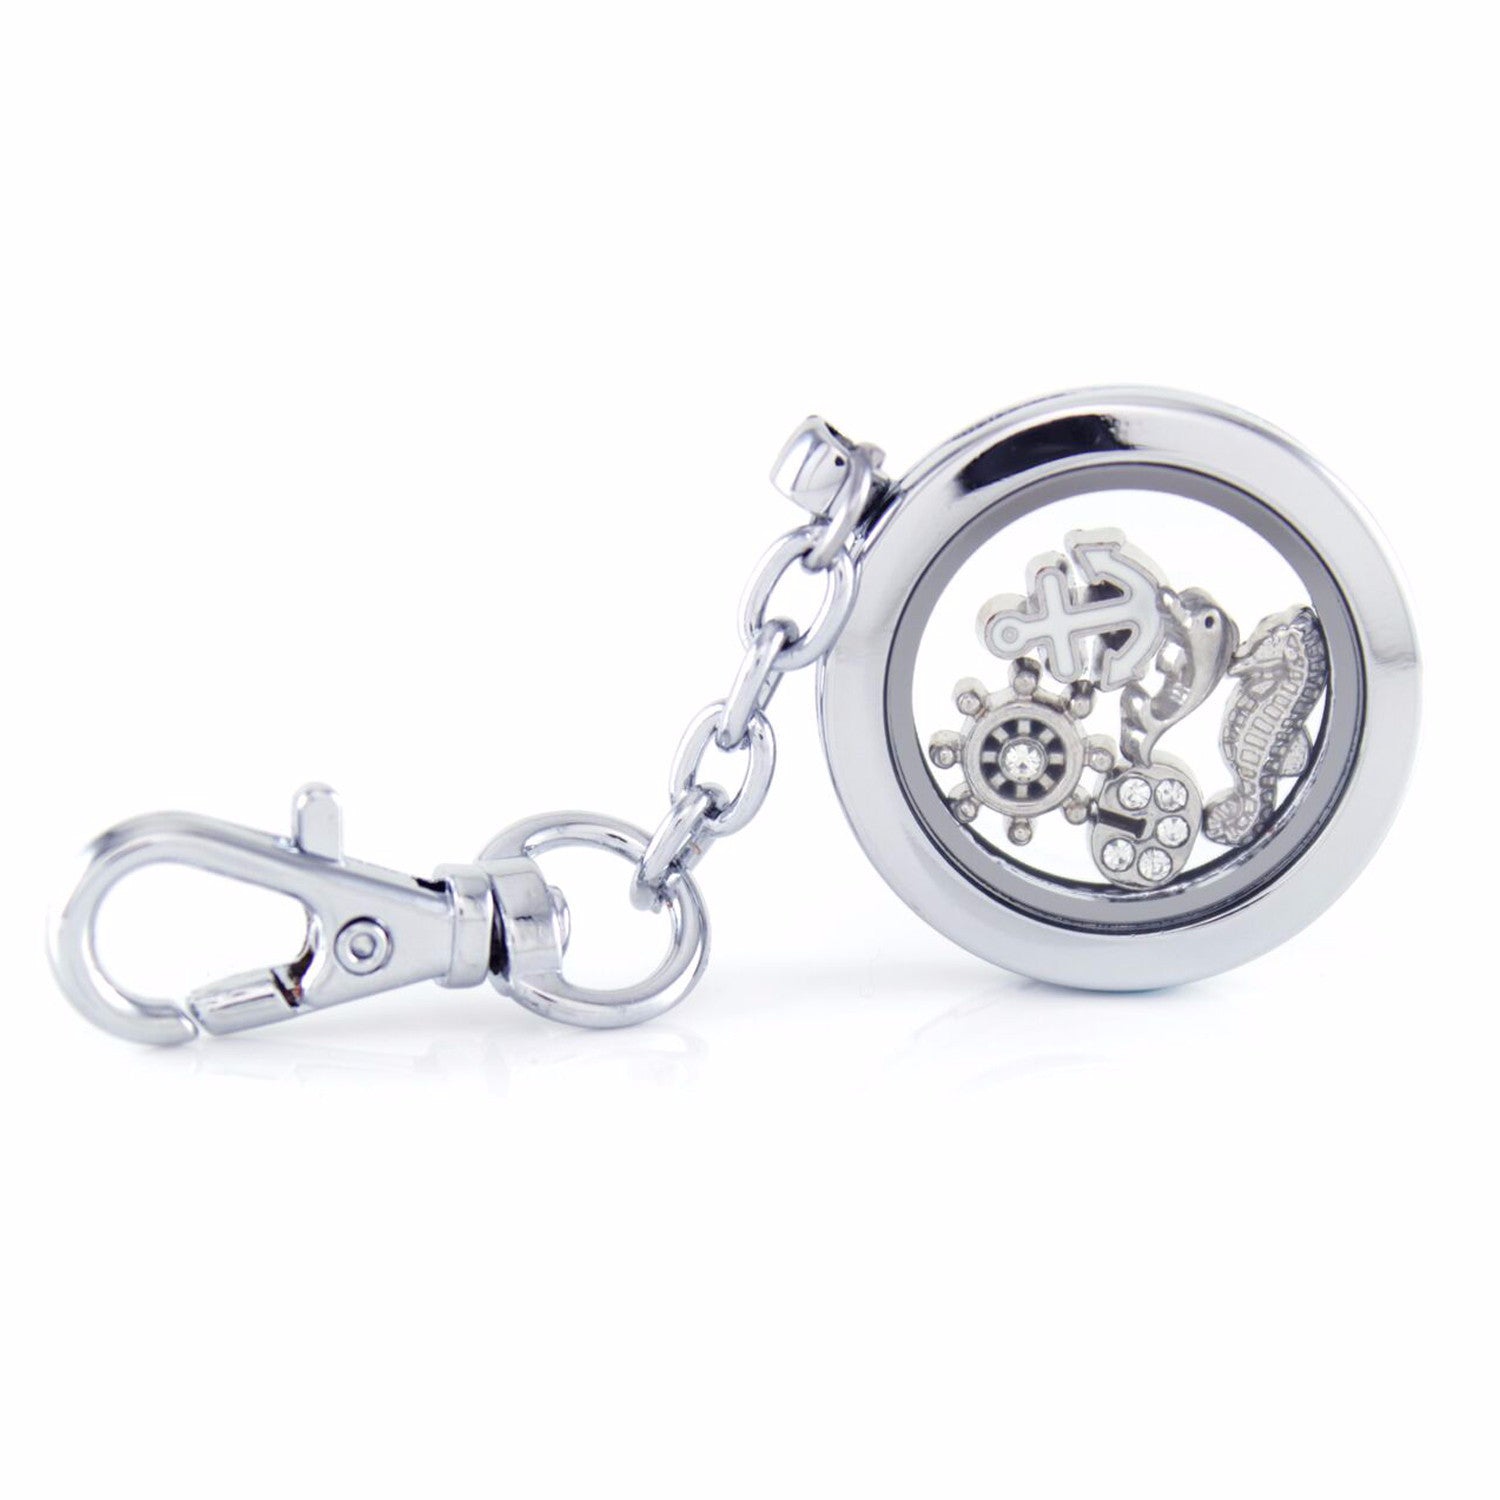 Silver Circle Floating Locket Keychain Includes 4 Charm Choices By